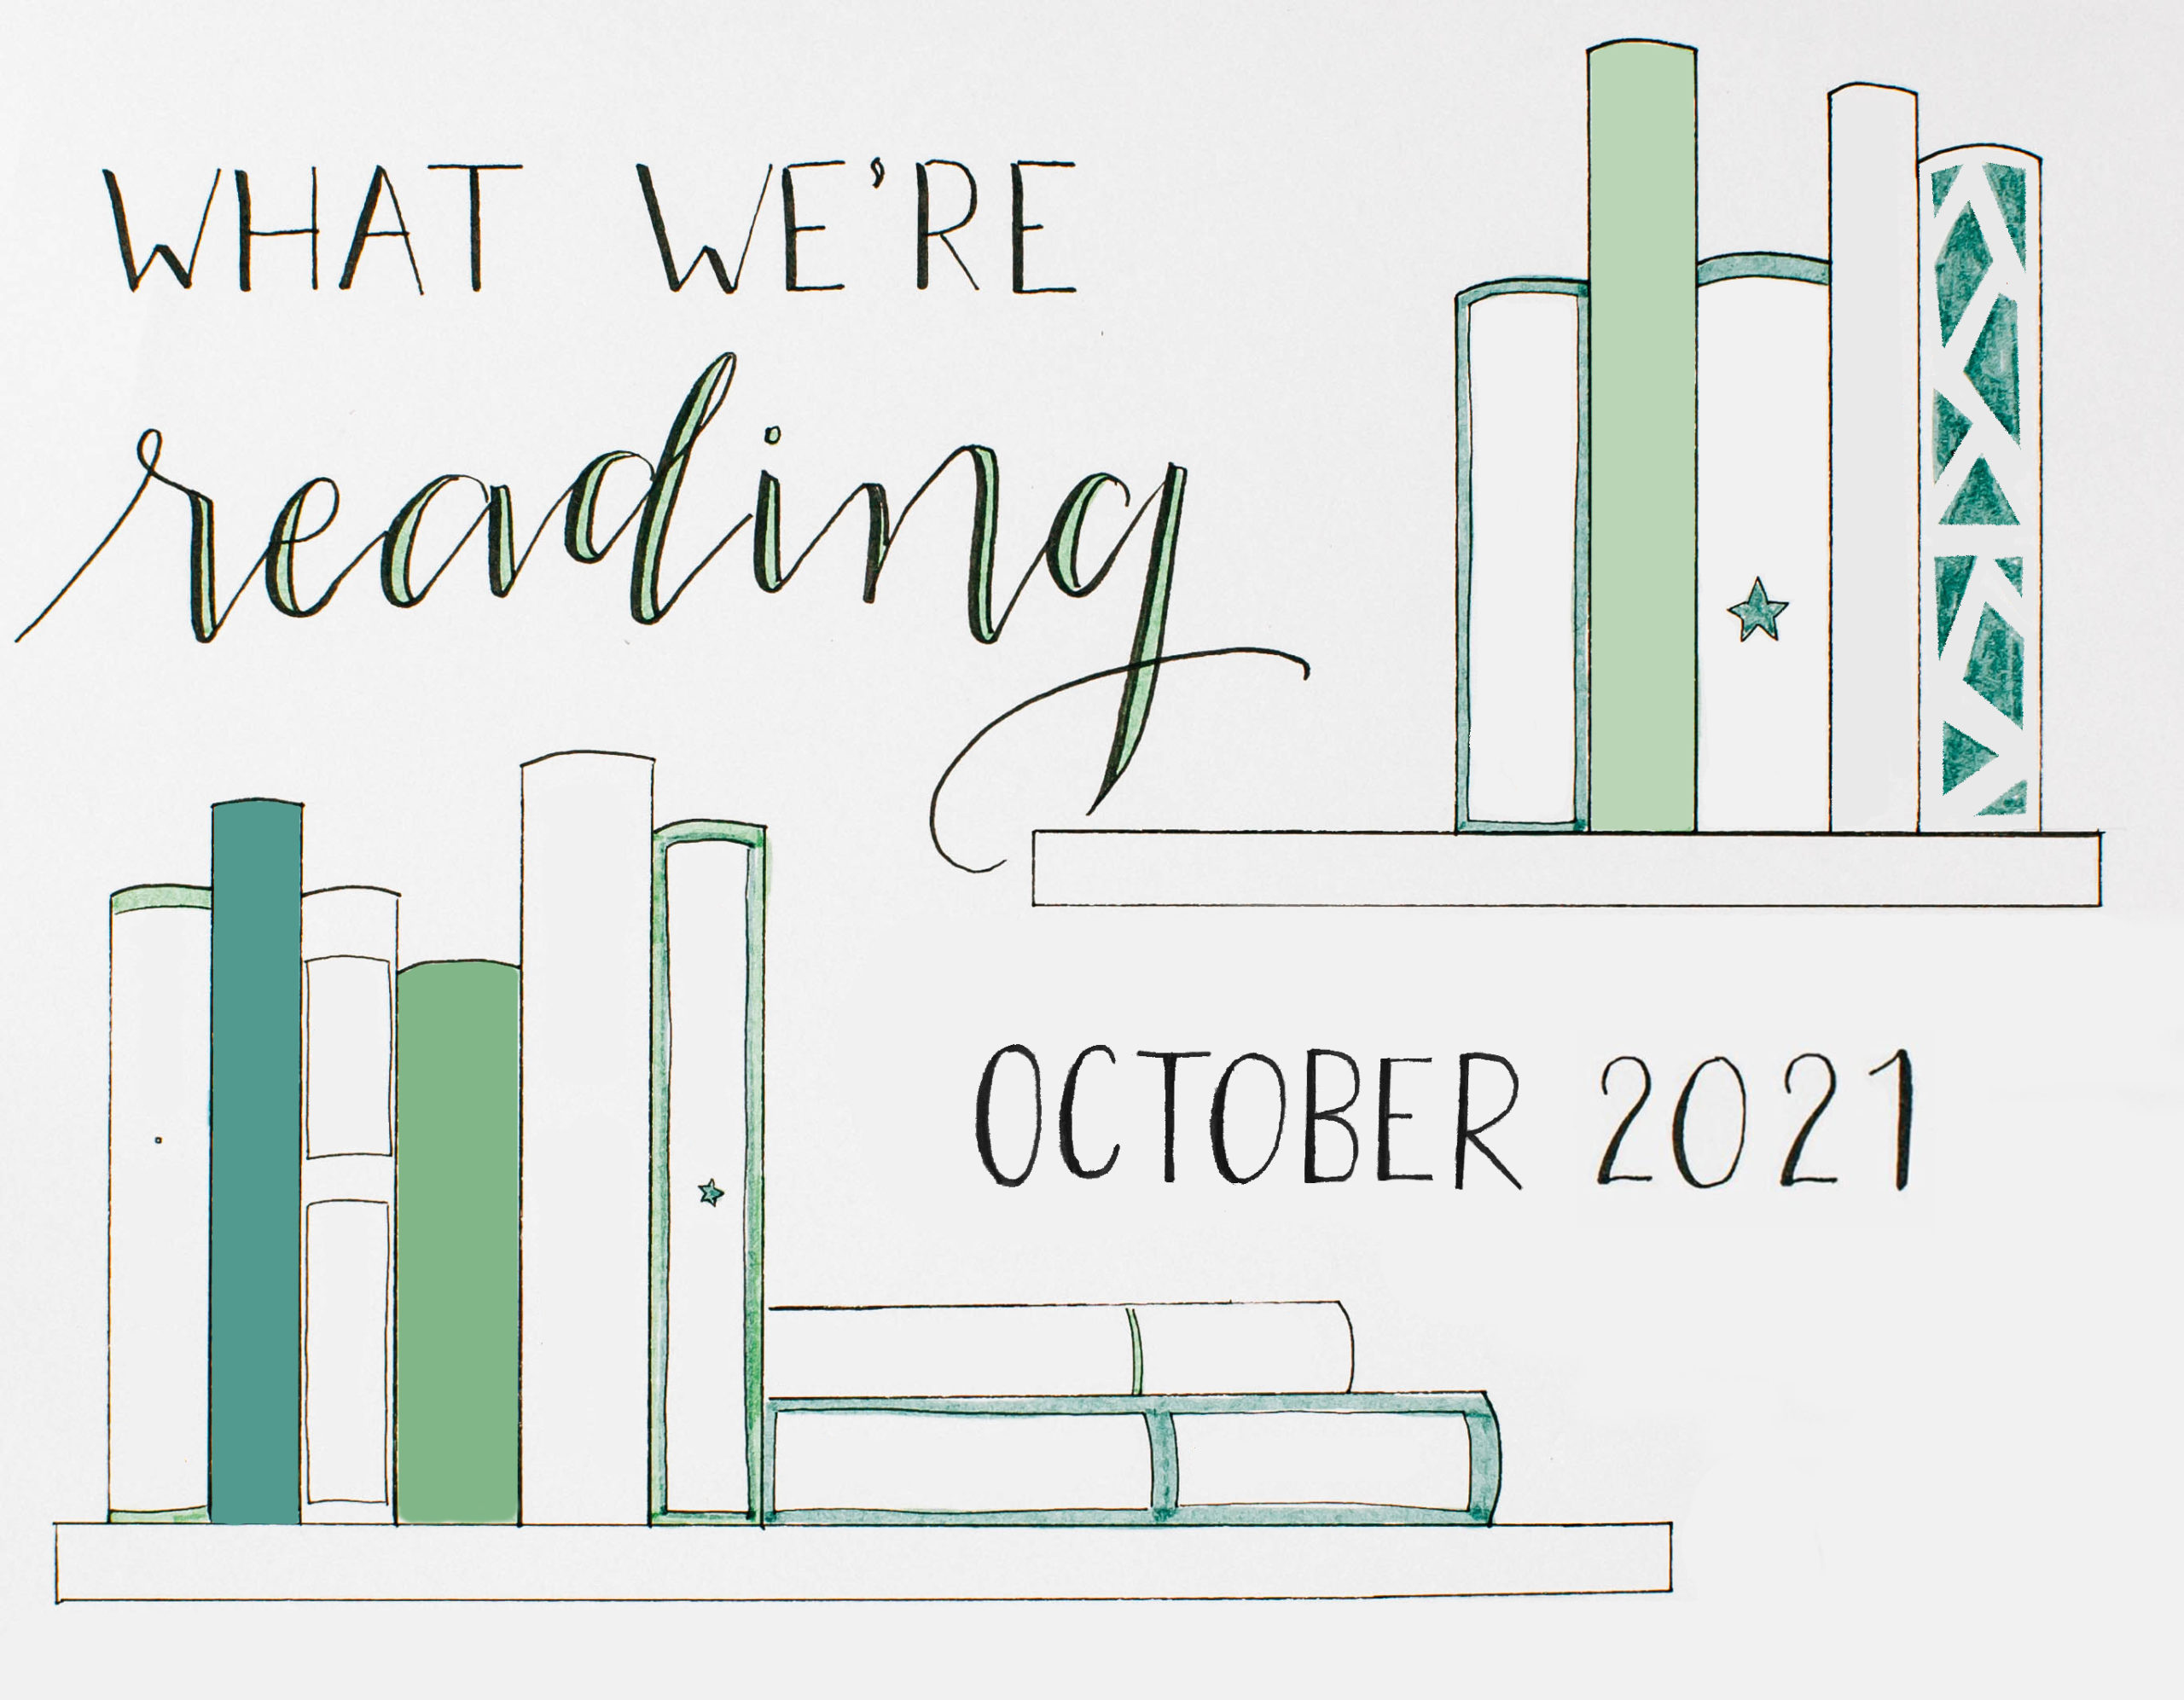 A hand-drawn visual depicting a selection of books on a shelf, accompanied by the title "what we're reading" for october 2021, rendered in artistic lettering.